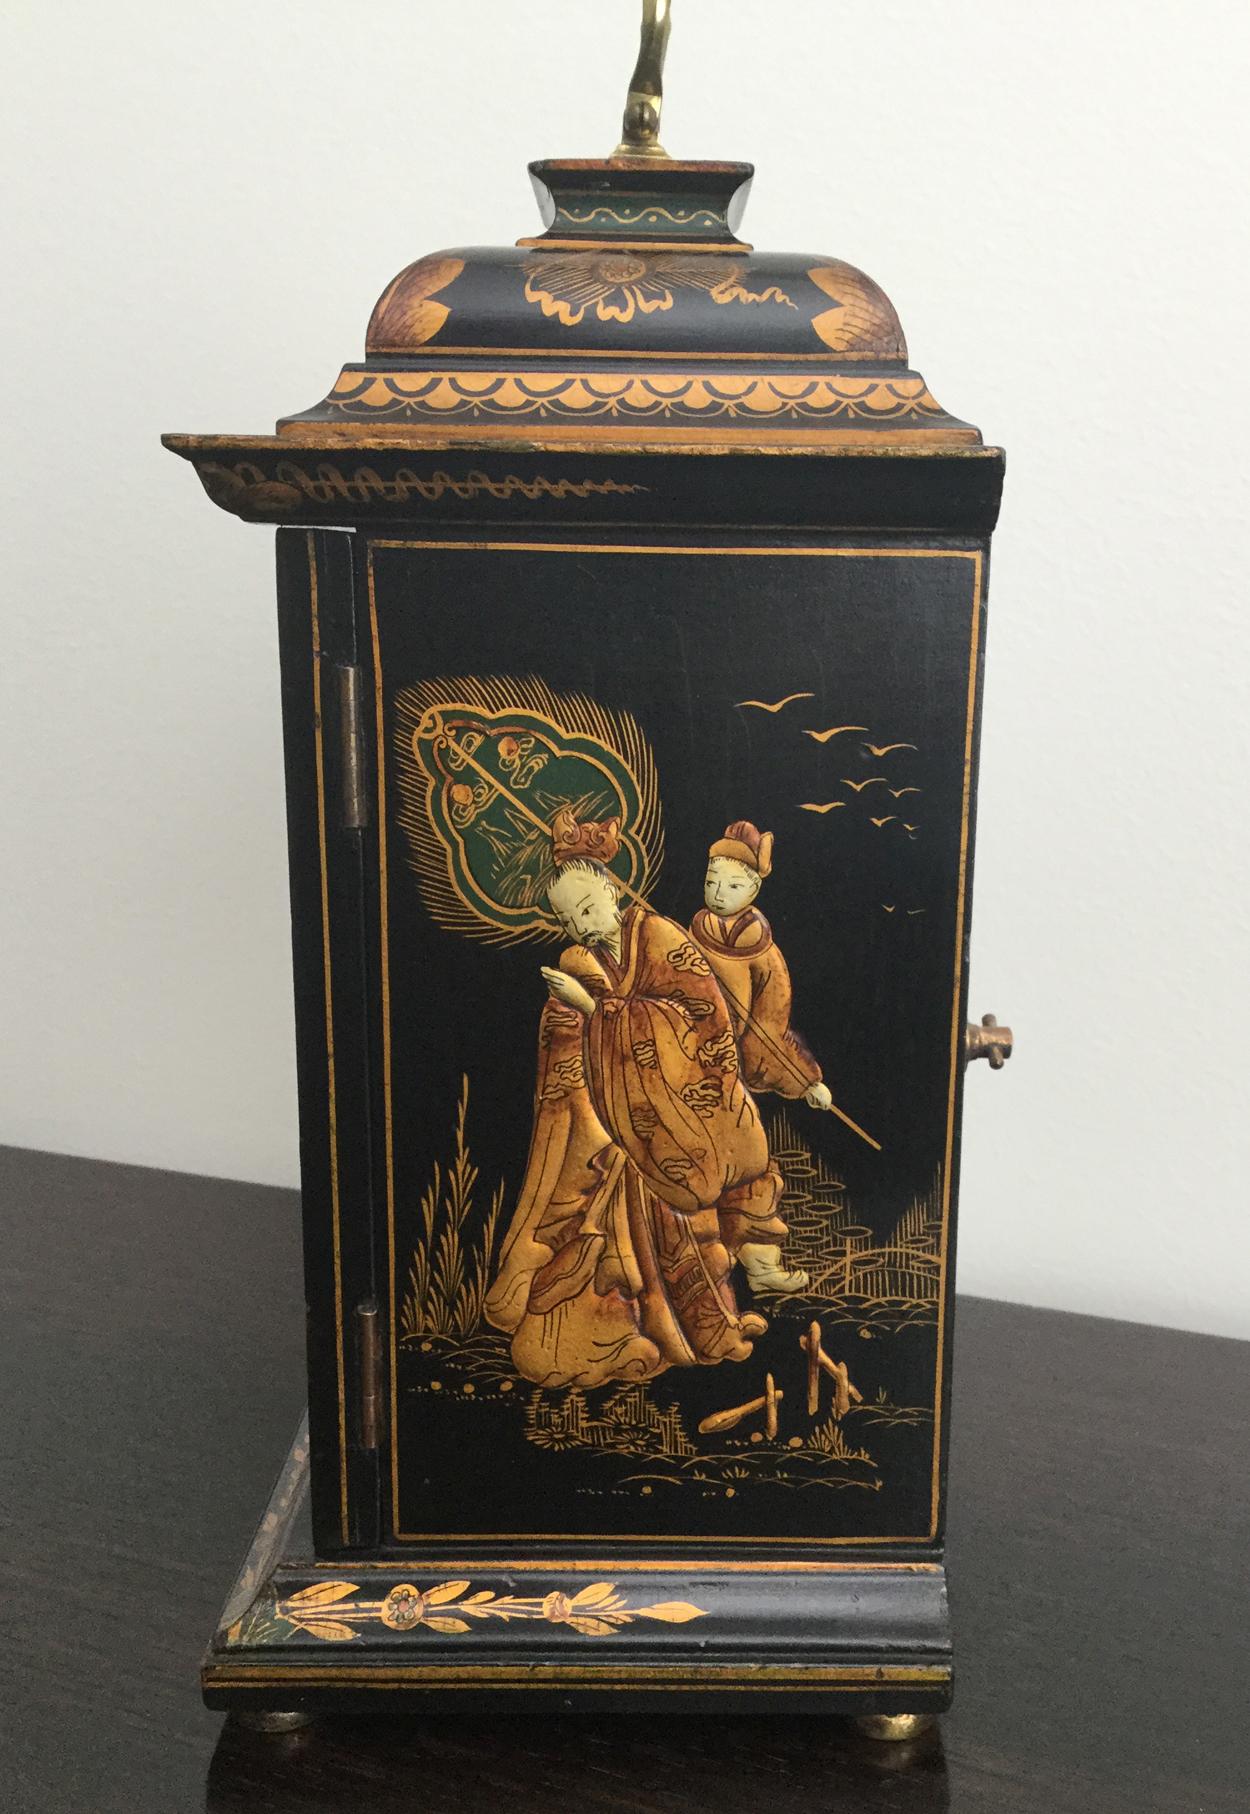 Wood Green Chinoiserie Georgian Style Mantel Clock by English Maker Astral